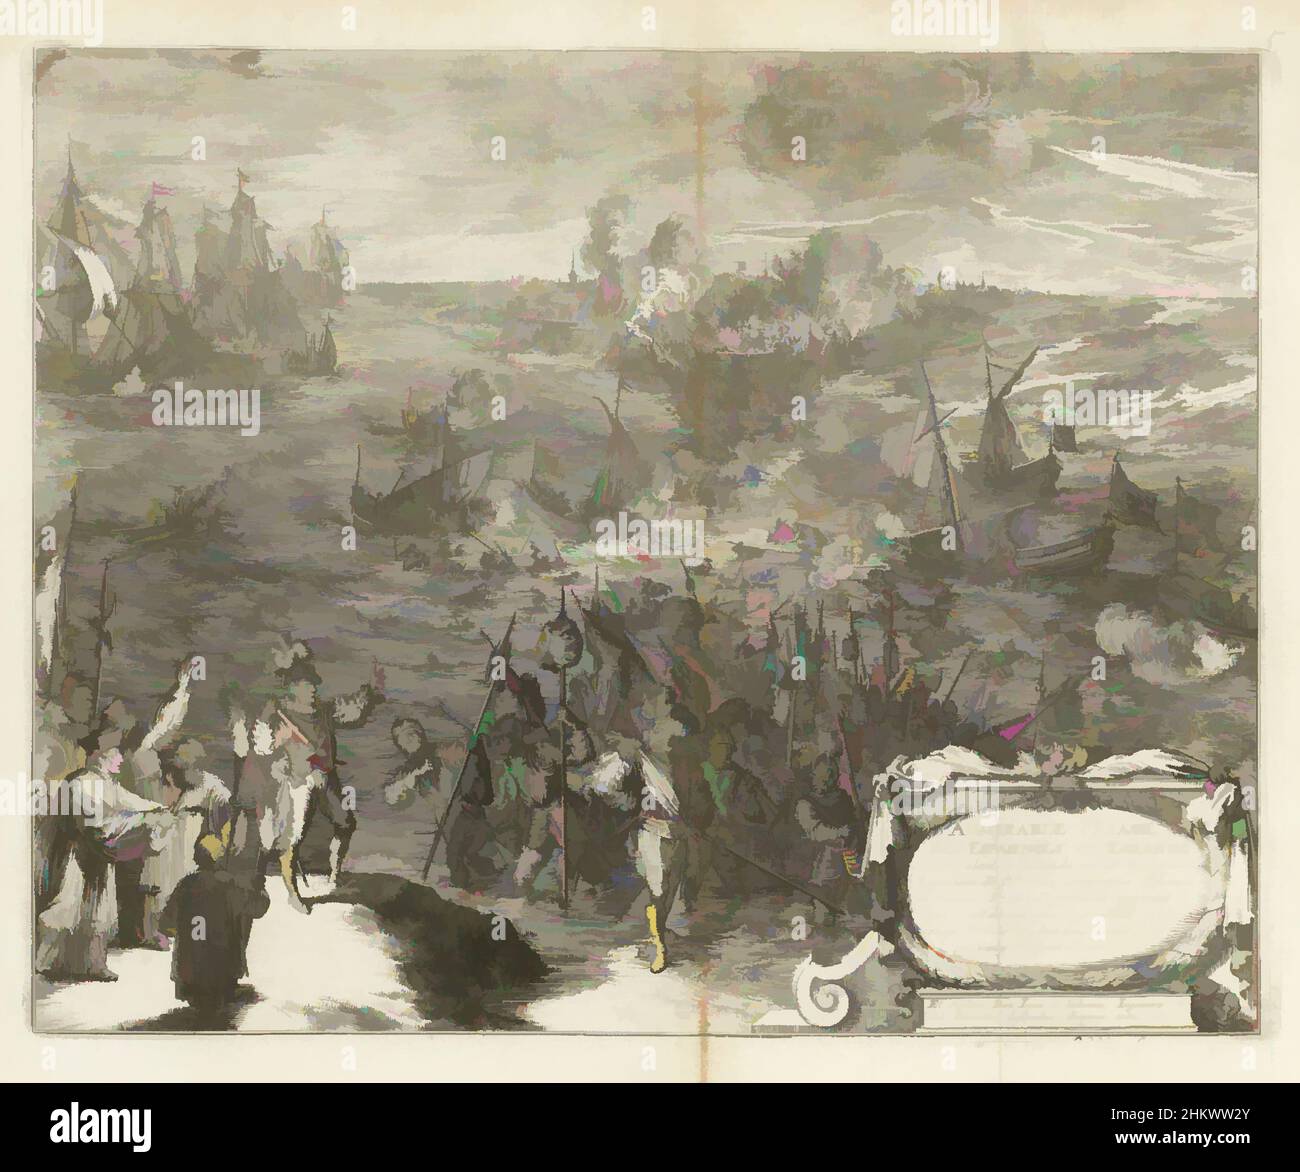 Art inspired by Night march of Spanish soldiers to Duiveland, 1575, Admirable Pas[s]age des Espagnols en Zelande, Guerres de Flandres (series title), Night march of Spanish soldiers to Duiveland, September 28, 1575. Spanish soldiers wade through the water to Duiveland. In the foreground, Classic works modernized by Artotop with a splash of modernity. Shapes, color and value, eye-catching visual impact on art. Emotions through freedom of artworks in a contemporary way. A timeless message pursuing a wildly creative new direction. Artists turning to the digital medium and creating the Artotop NFT Stock Photo